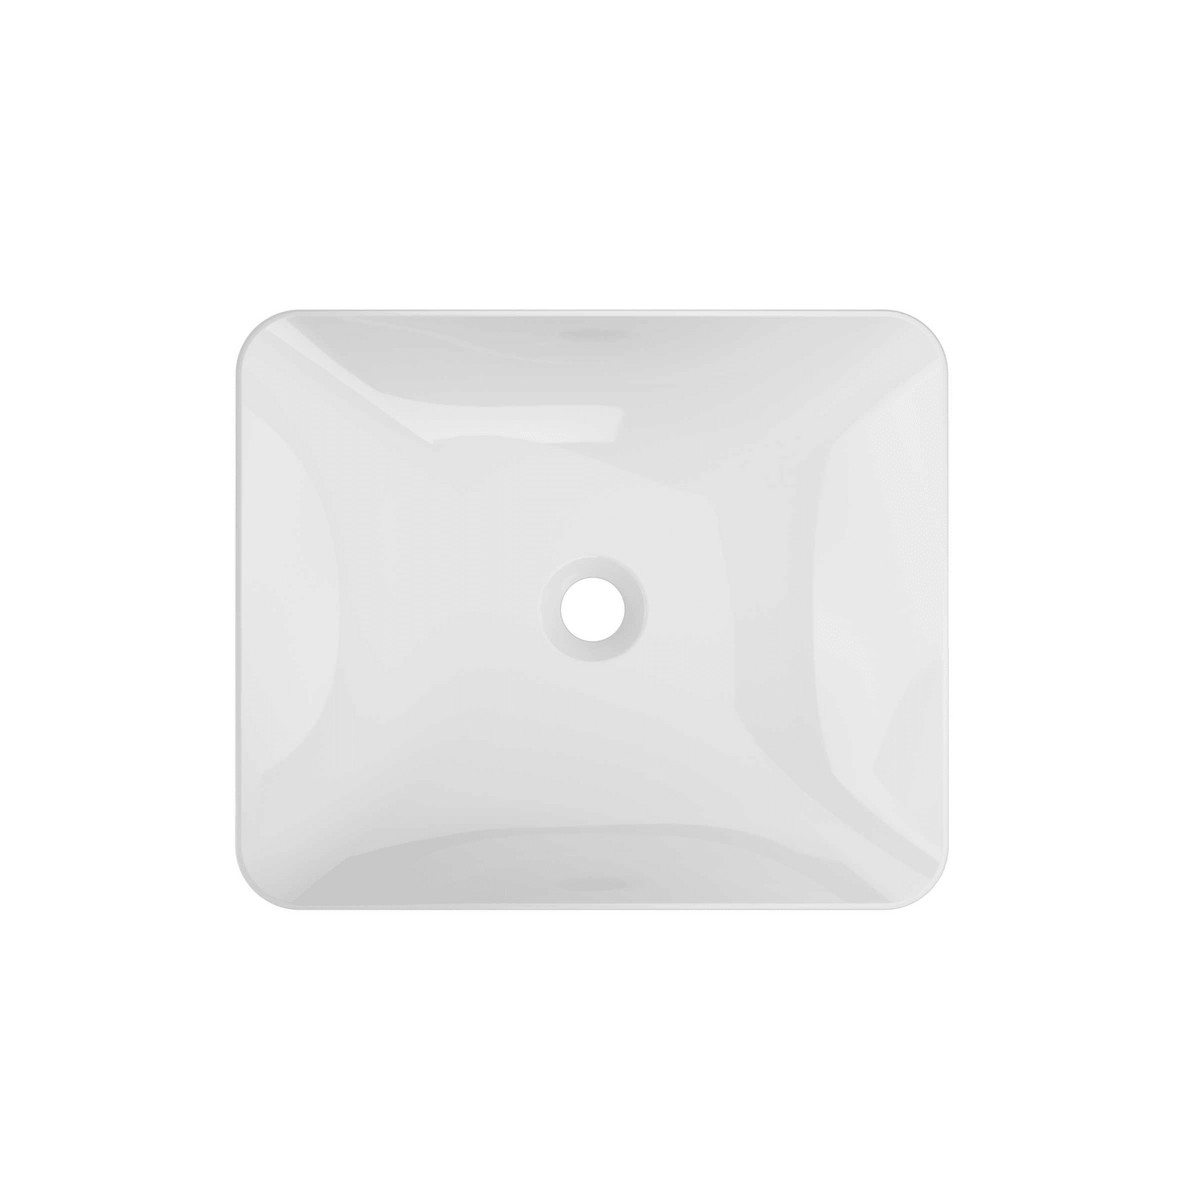 JACUZZI SOV1815G SORDINO 17 3/4 INCH SOLID SURFACE VESSEL BATHROOM SINK IN GLOSS WHITE